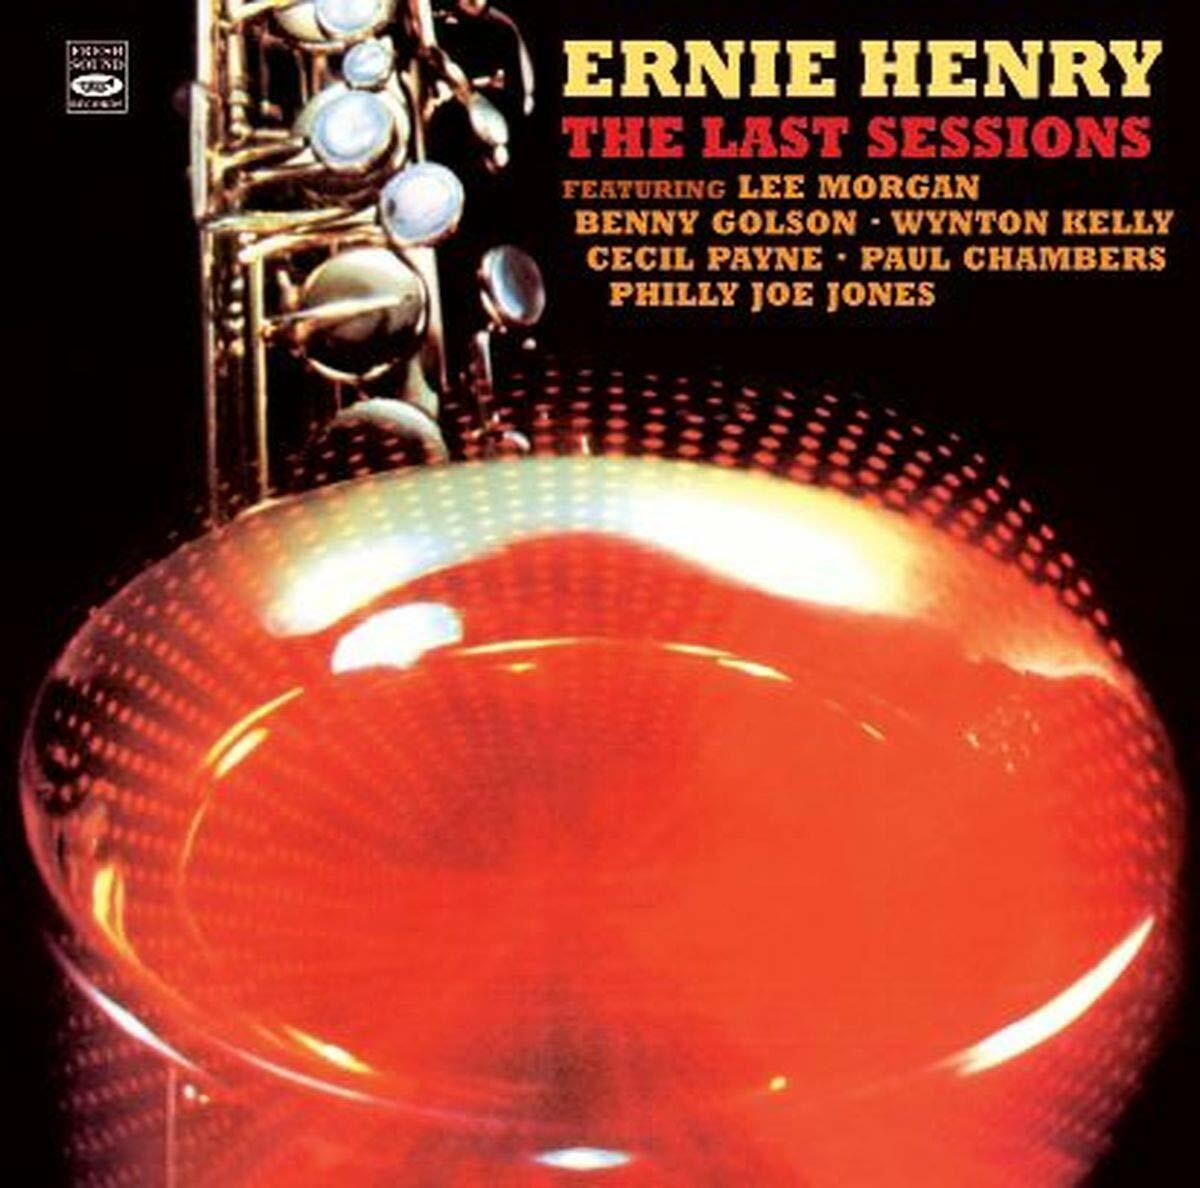 Ernie Henry The Last Sessions (2 LP On 1 CD)